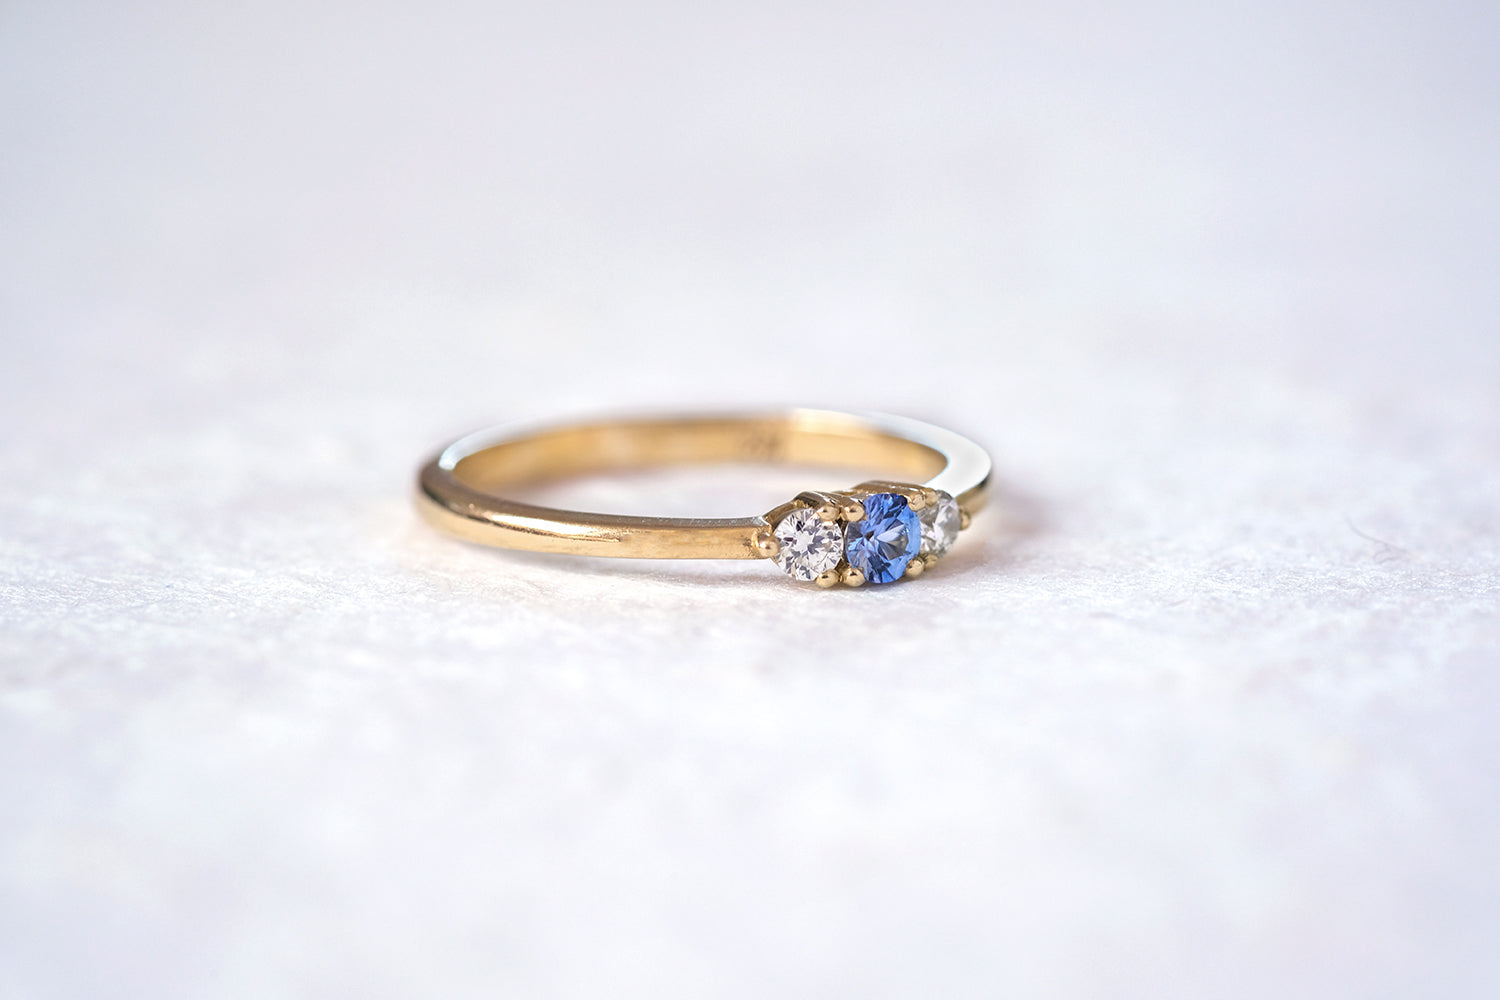 Engagement Gold Ring Set With A Sapphire And Two Diamonds